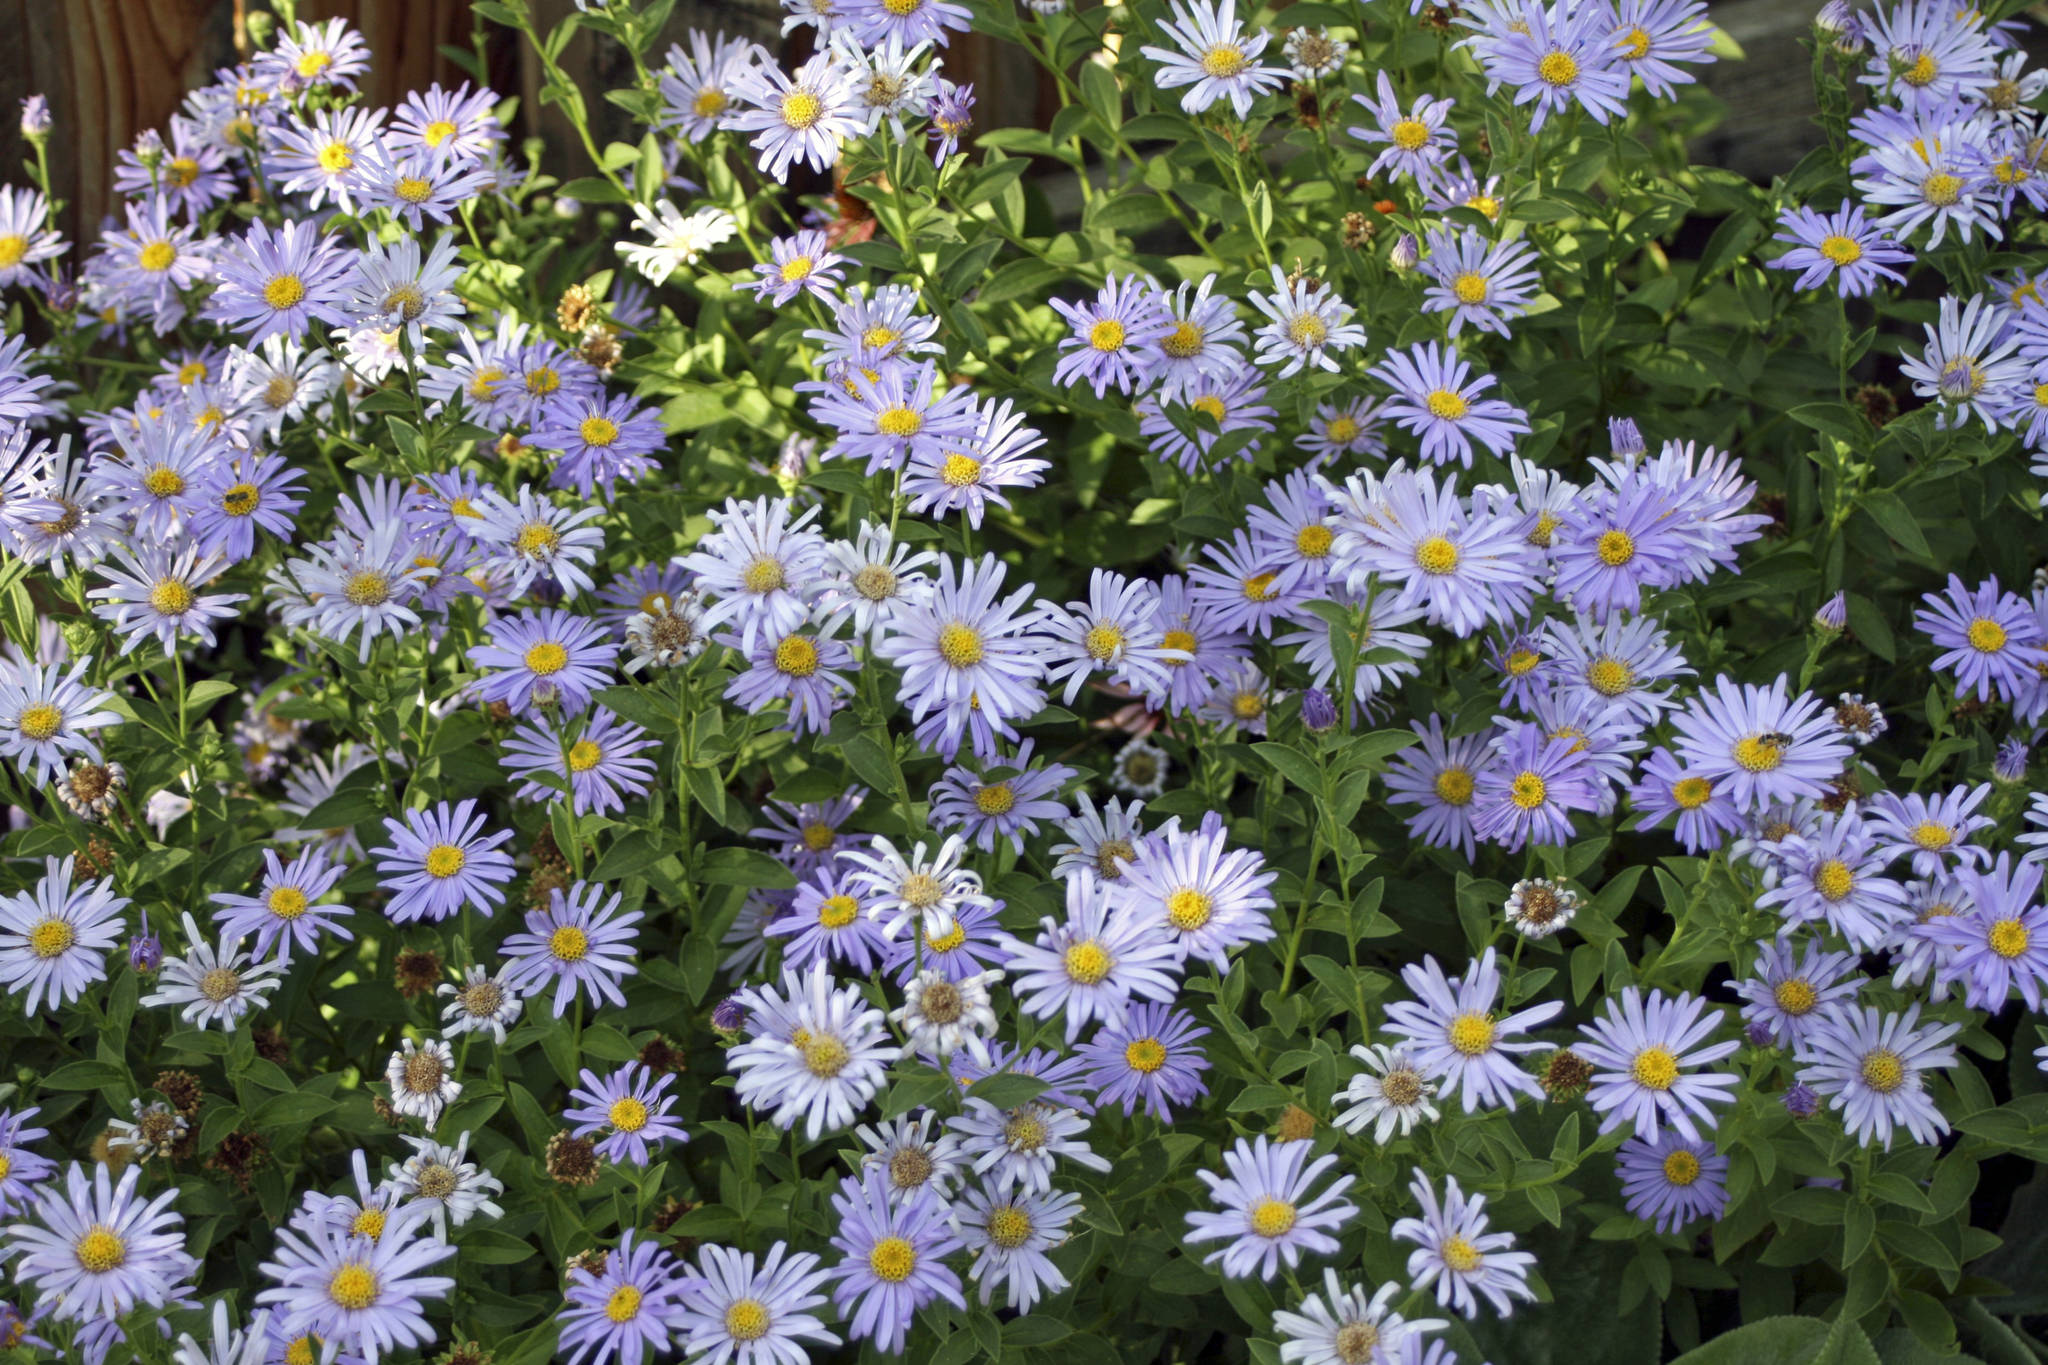 Patrick Standish photo                                Among the many varieties of New York aster is the Professor Kippenburg, which has lavender-blue blooms.